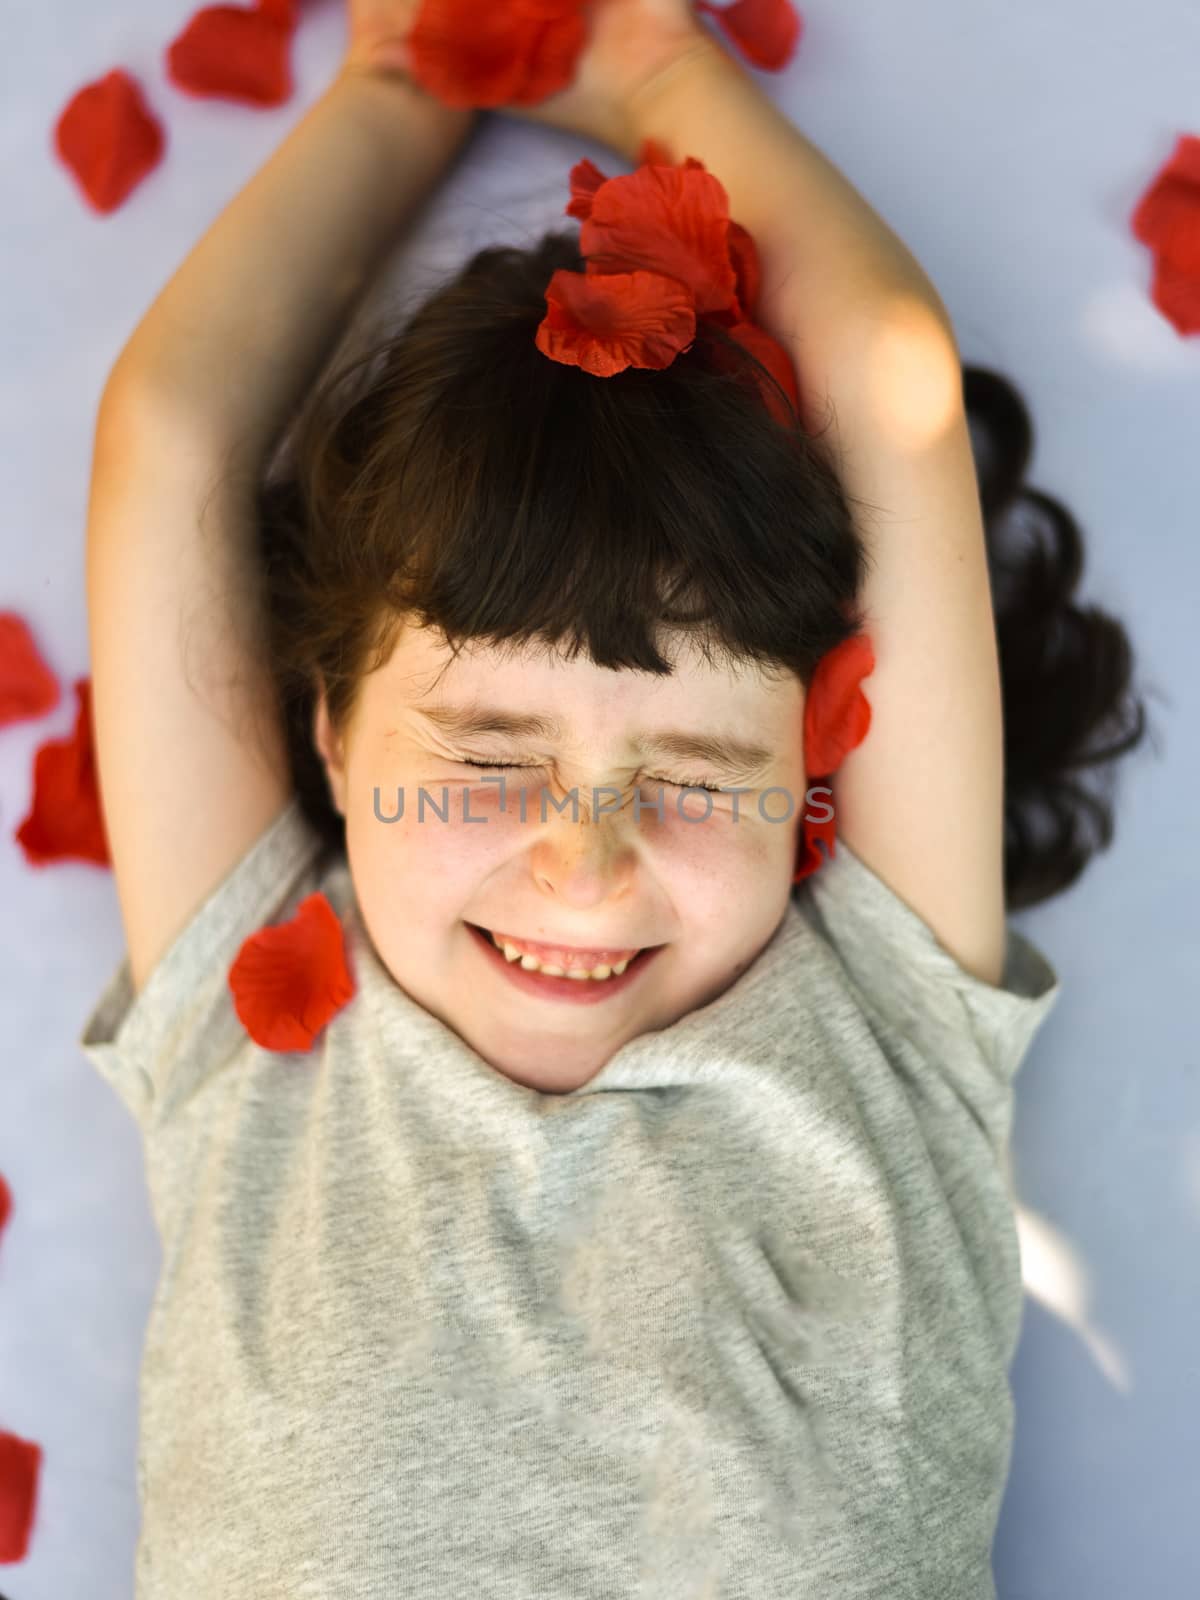 Smiling little girl squints as rose petals fall on her, vertical portrait